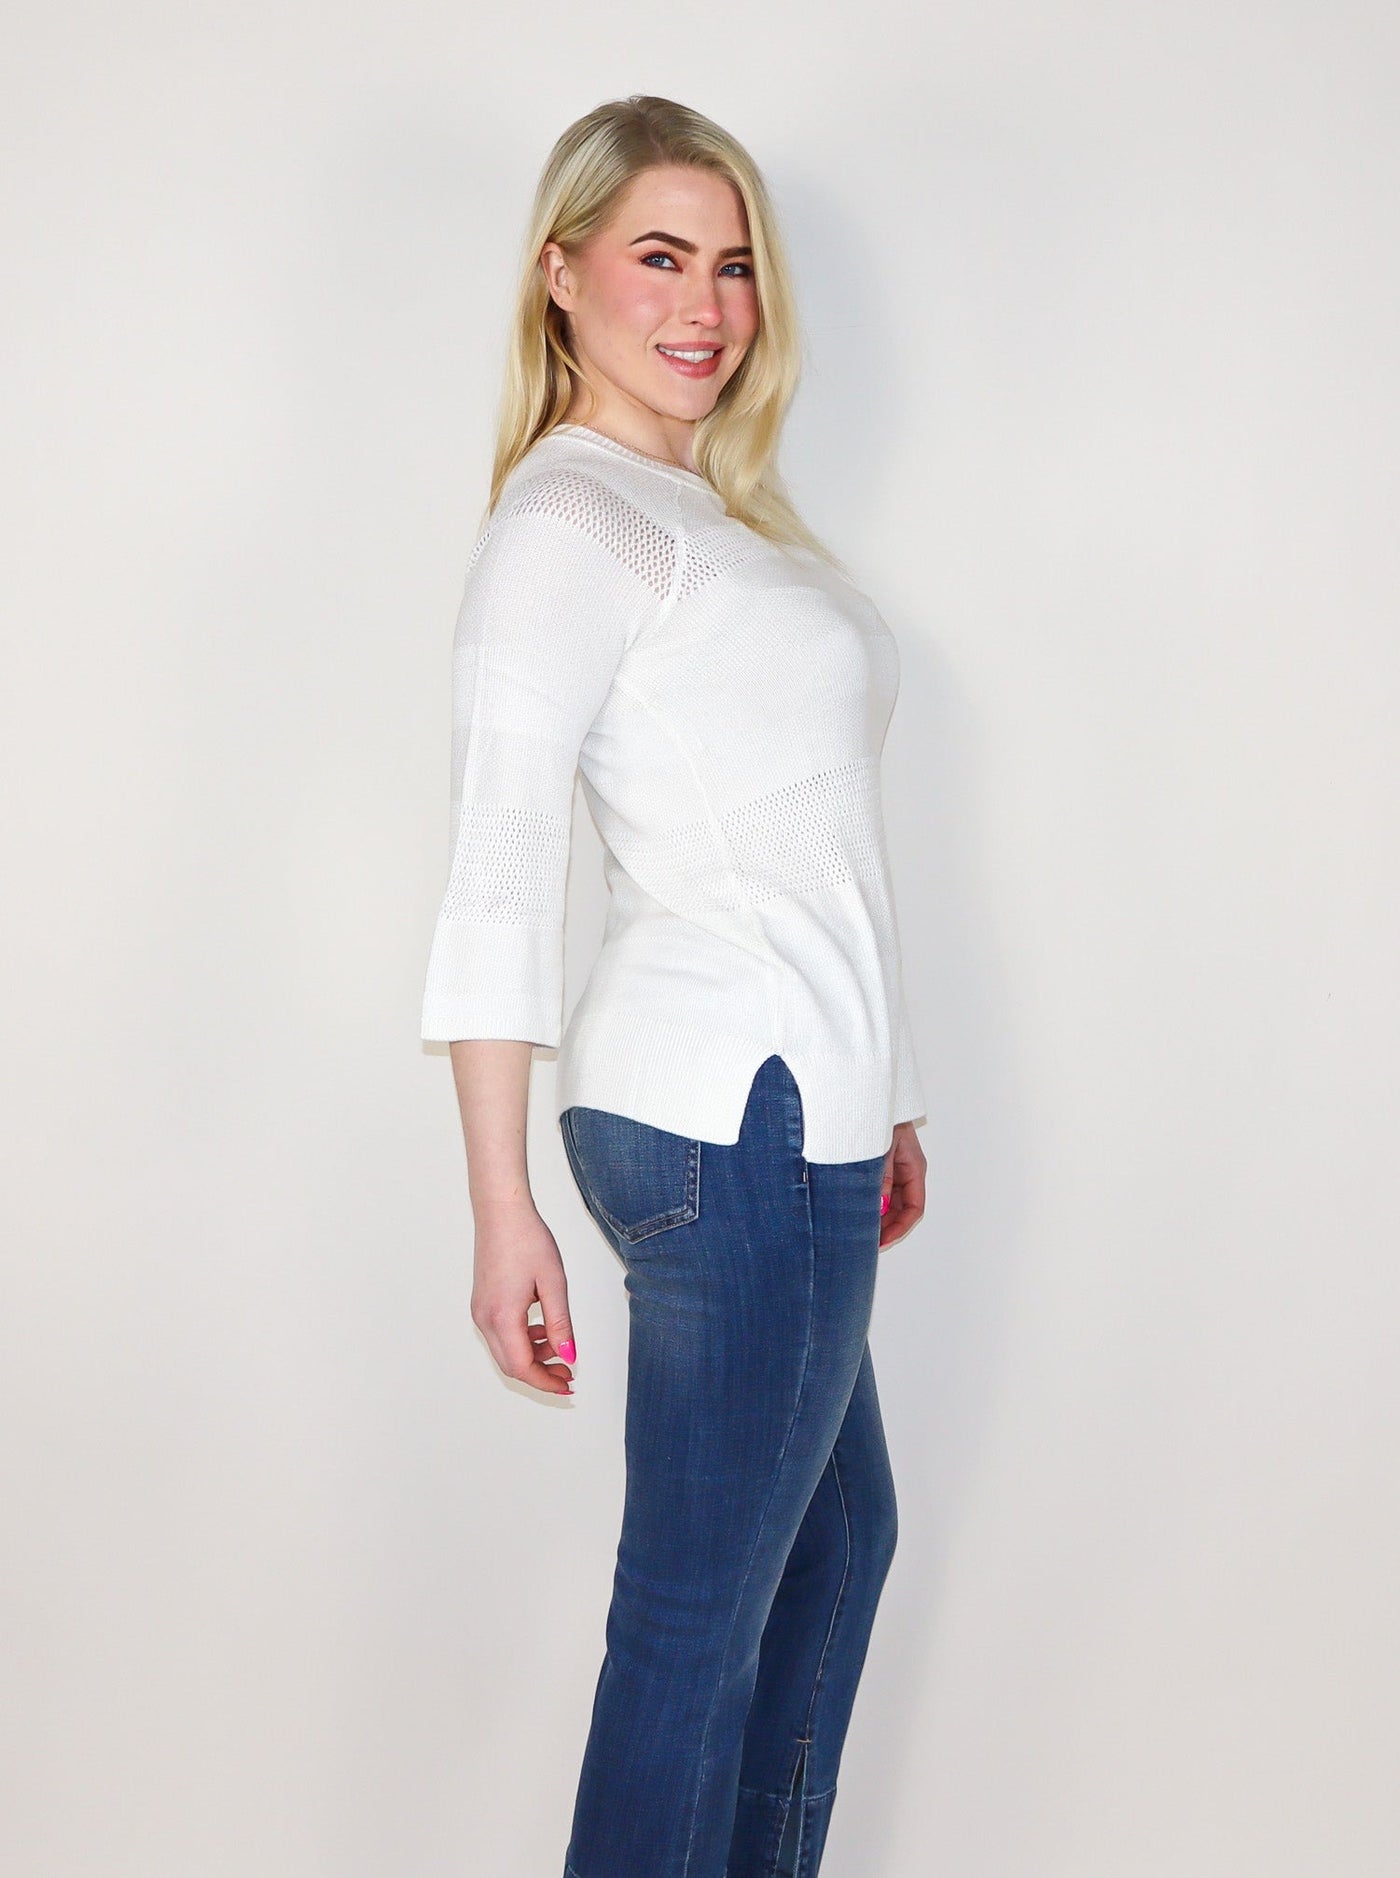 Model is wearing a white 3/4th sleeve Long sleeve with 2 thick horizontal lines of knitted detail. Shirt is paired with blue jeans.